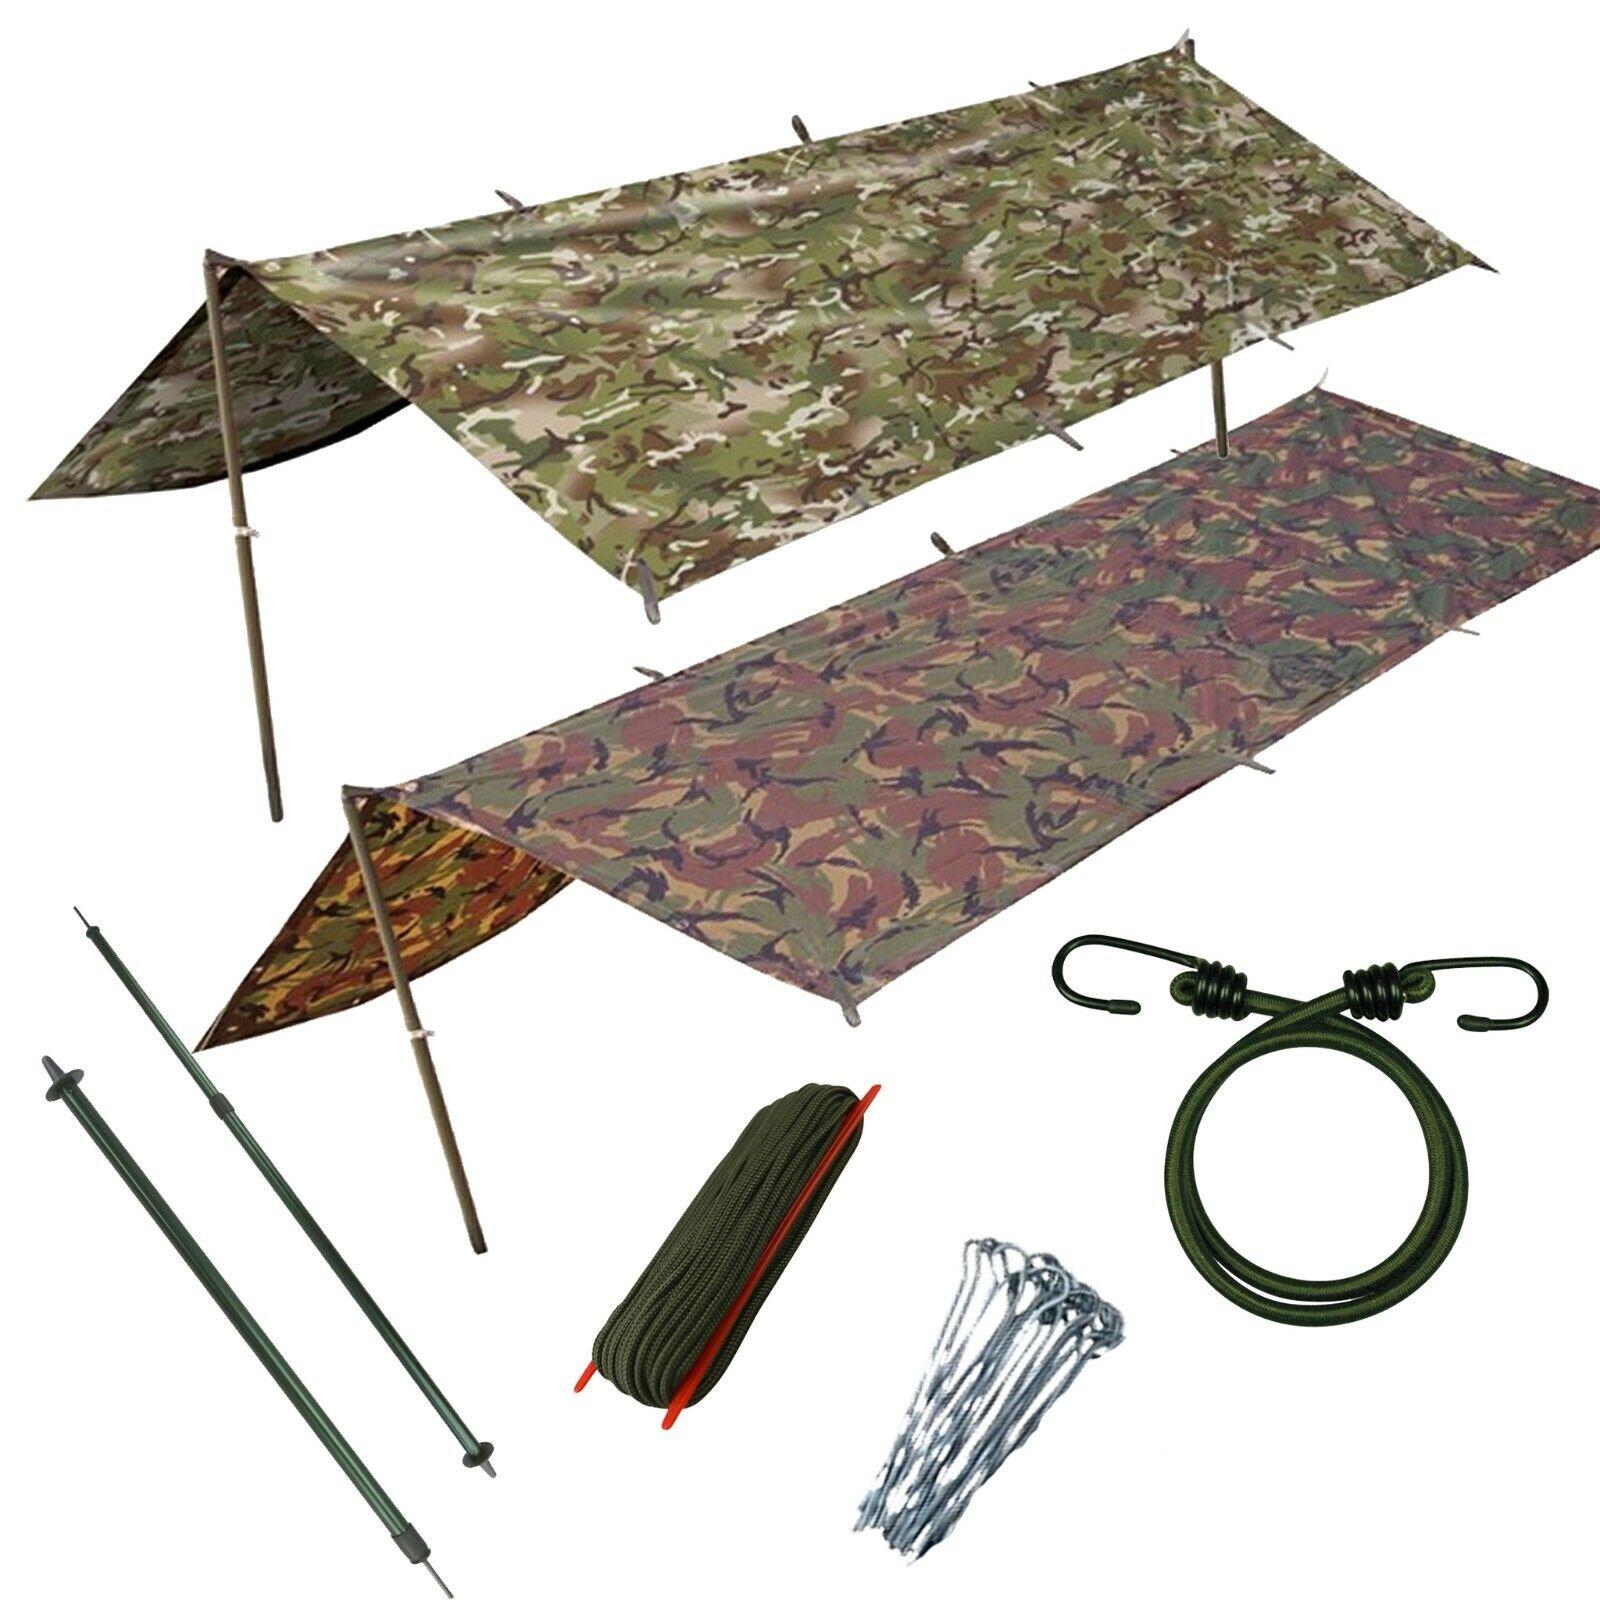 Basha Bundle - Poles, Para Cord, Tent Pegs and Bungee Cords